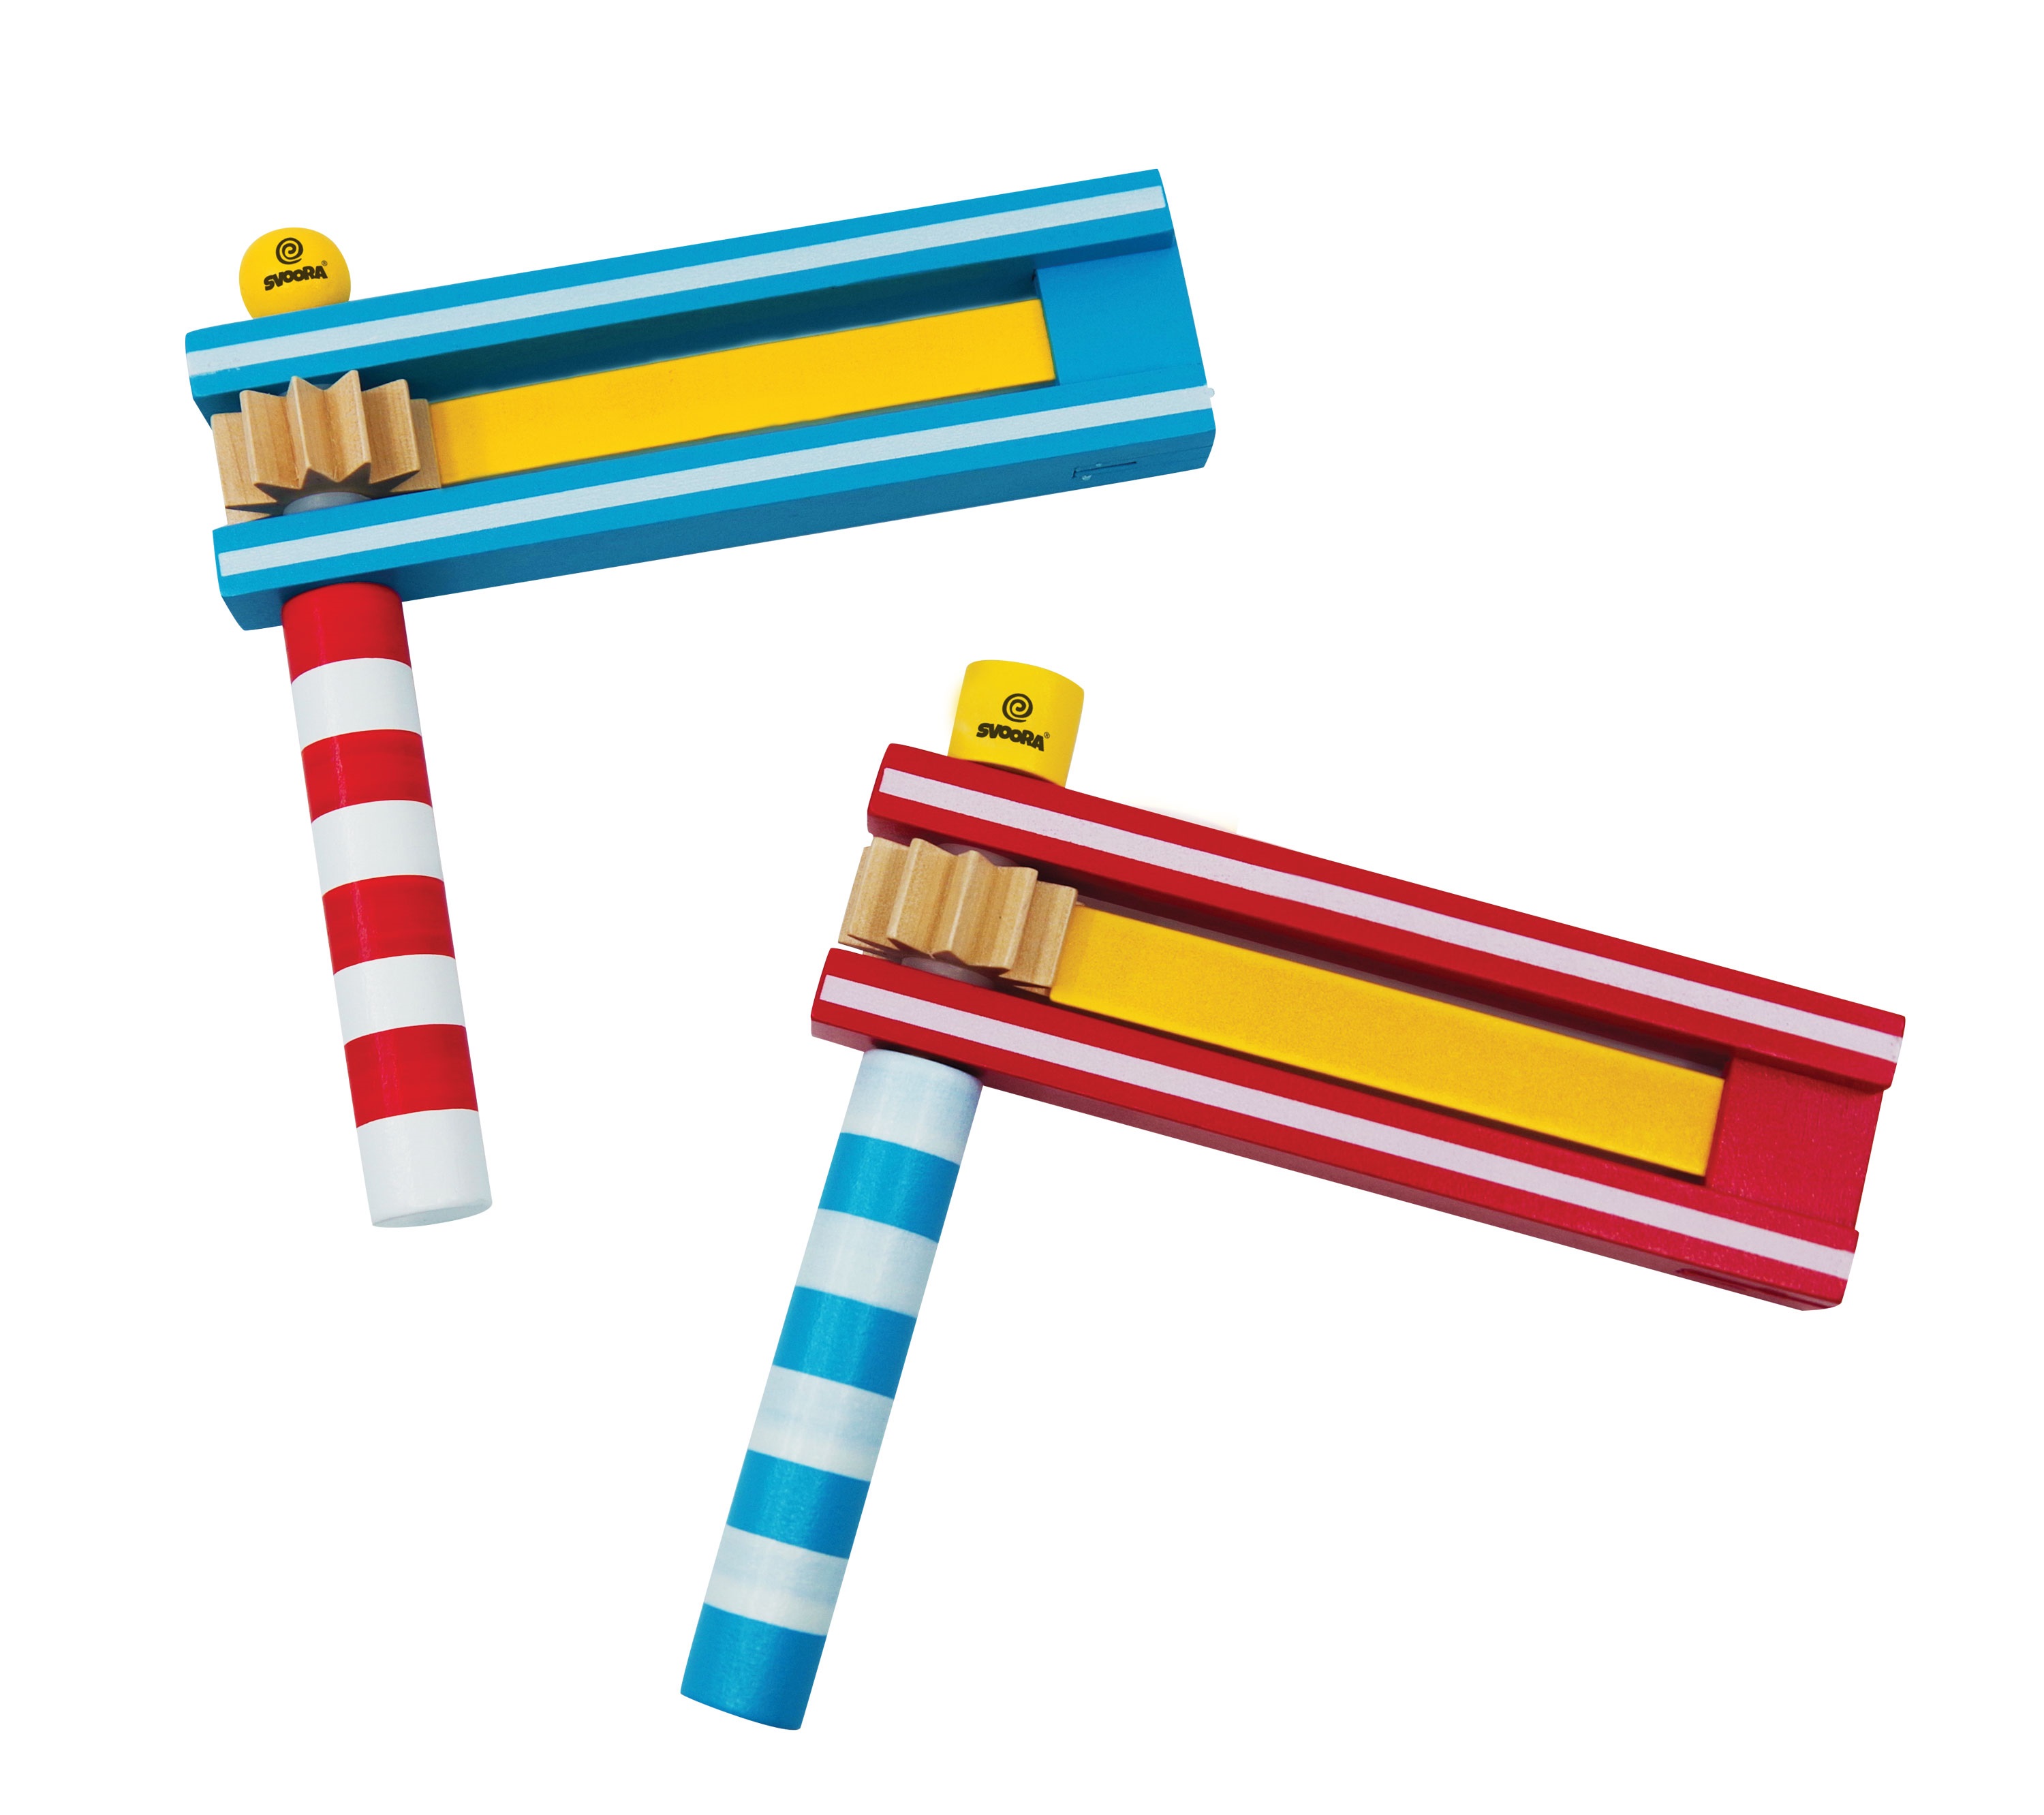 Svoora Colorful Rattle in 2 designs